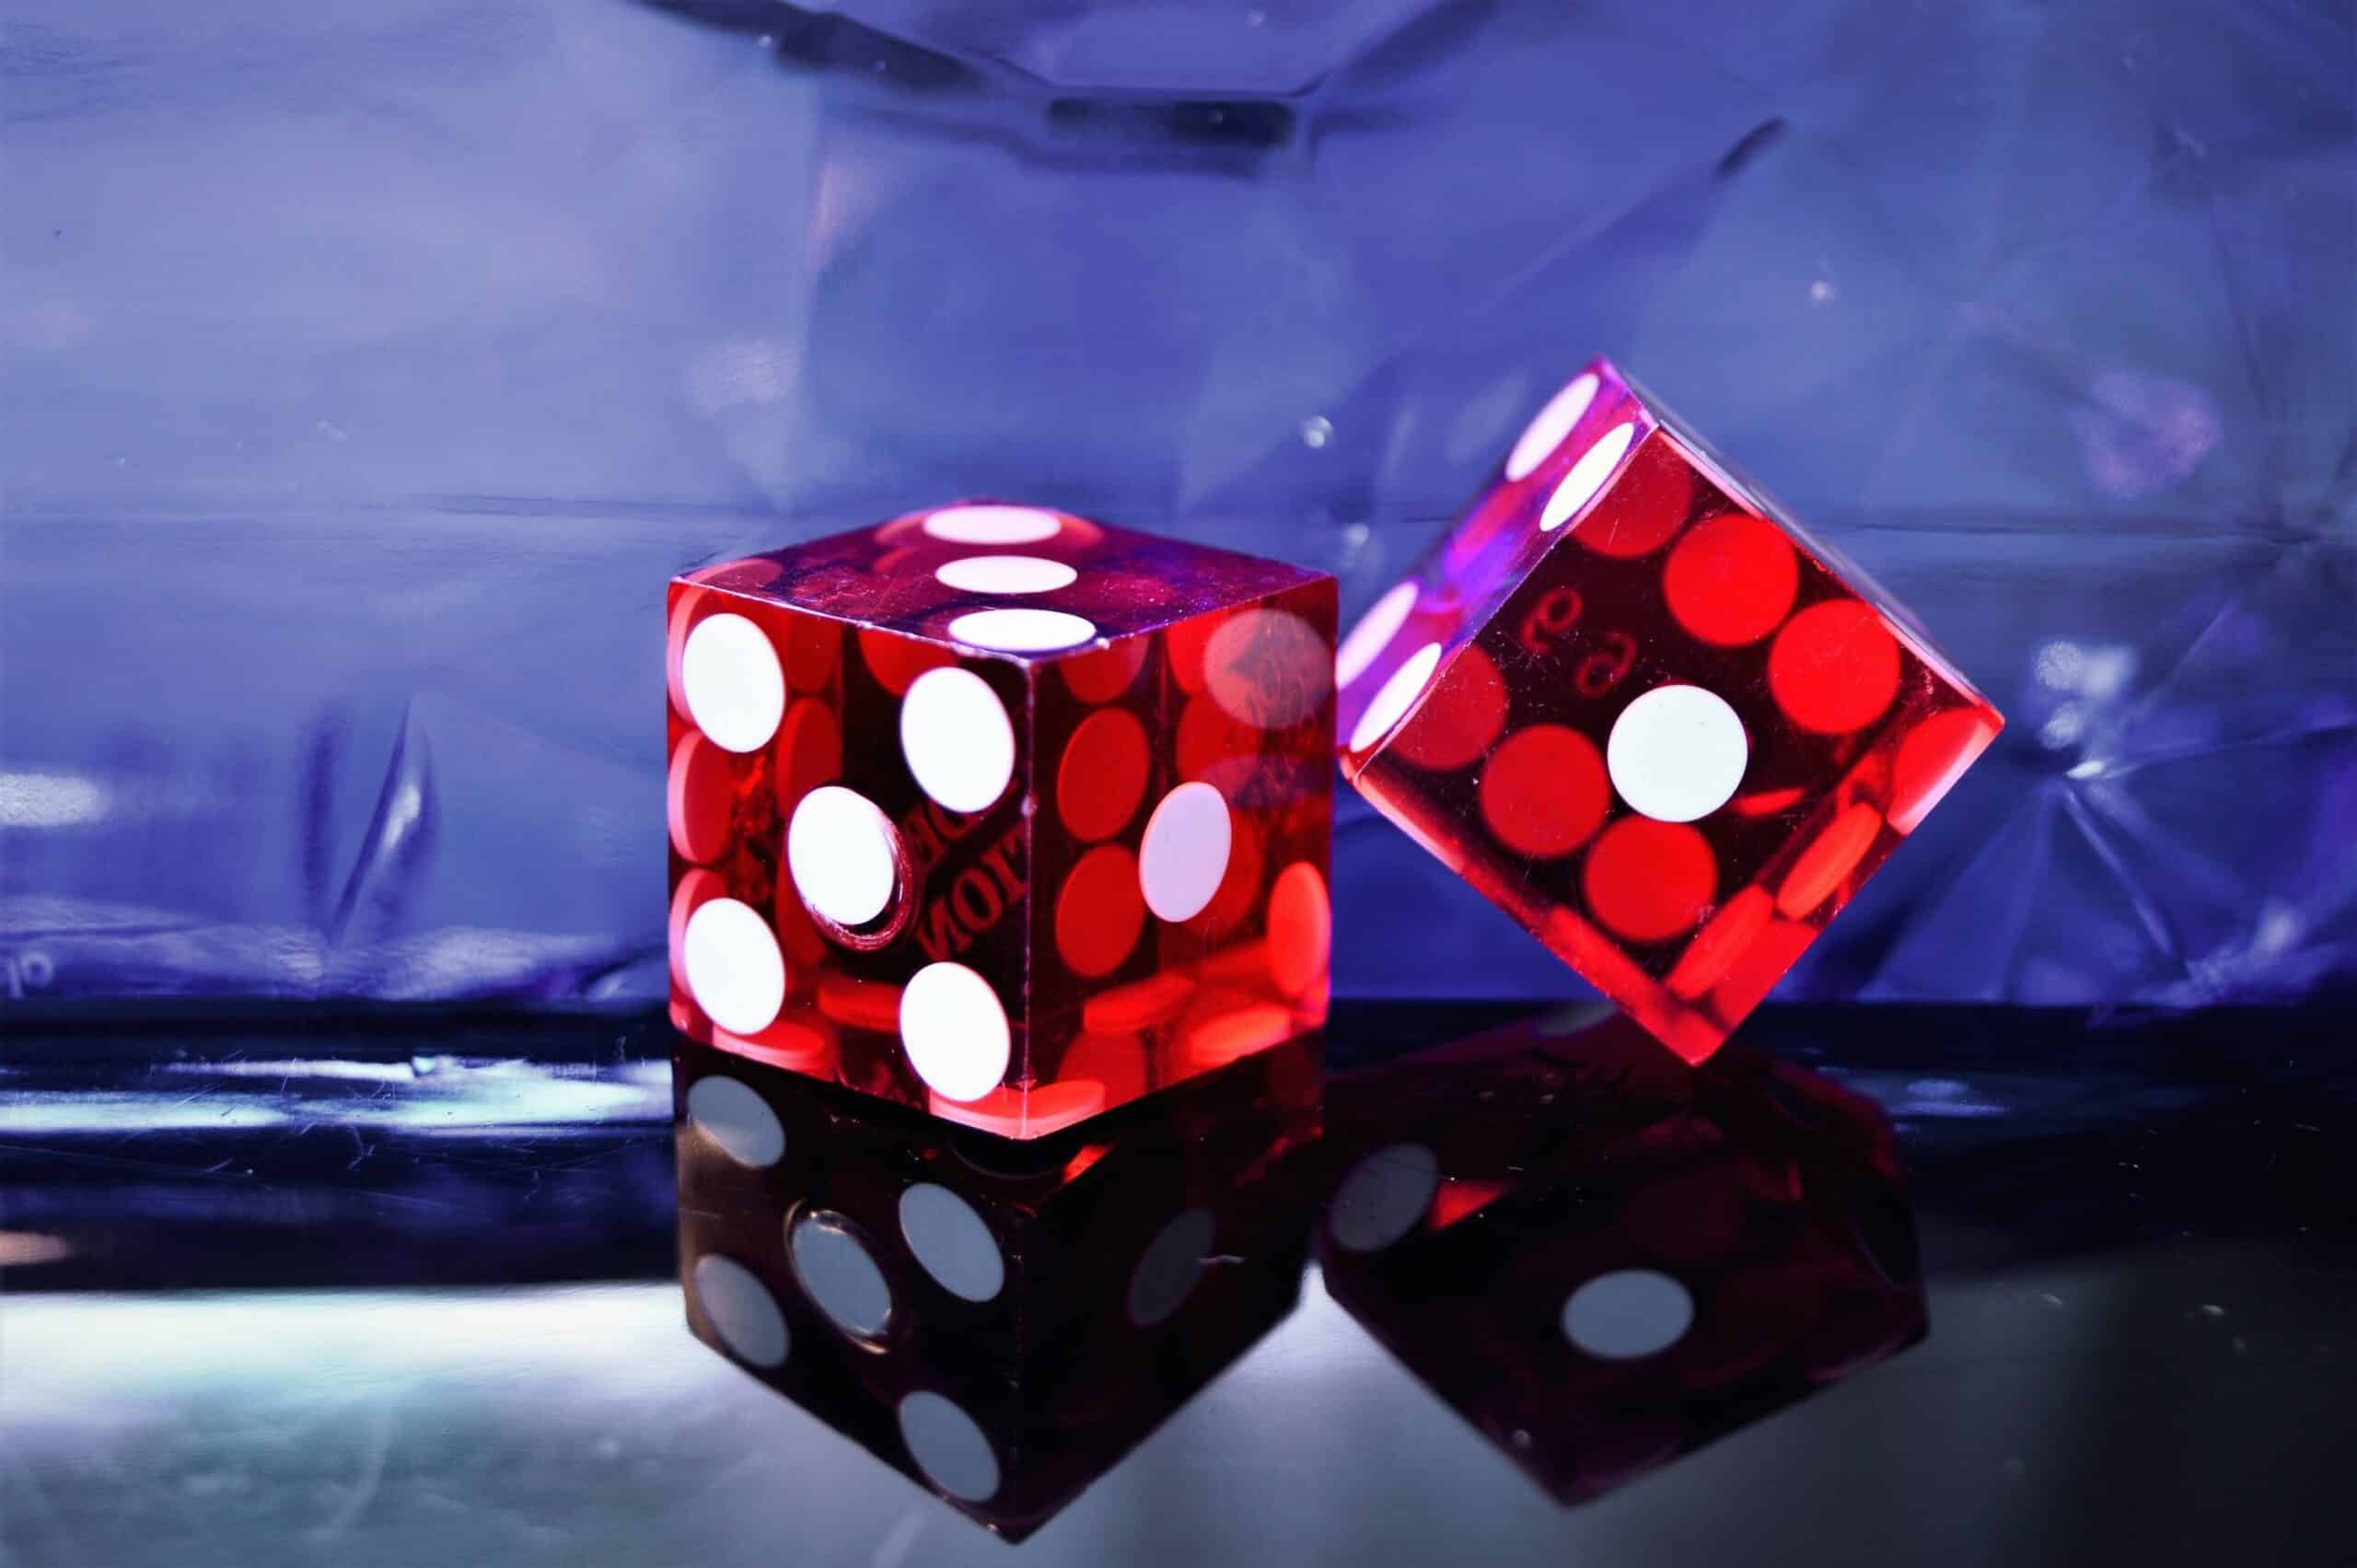 Craps Unveiled: The Excitement and Strategy Behind the Dice Game